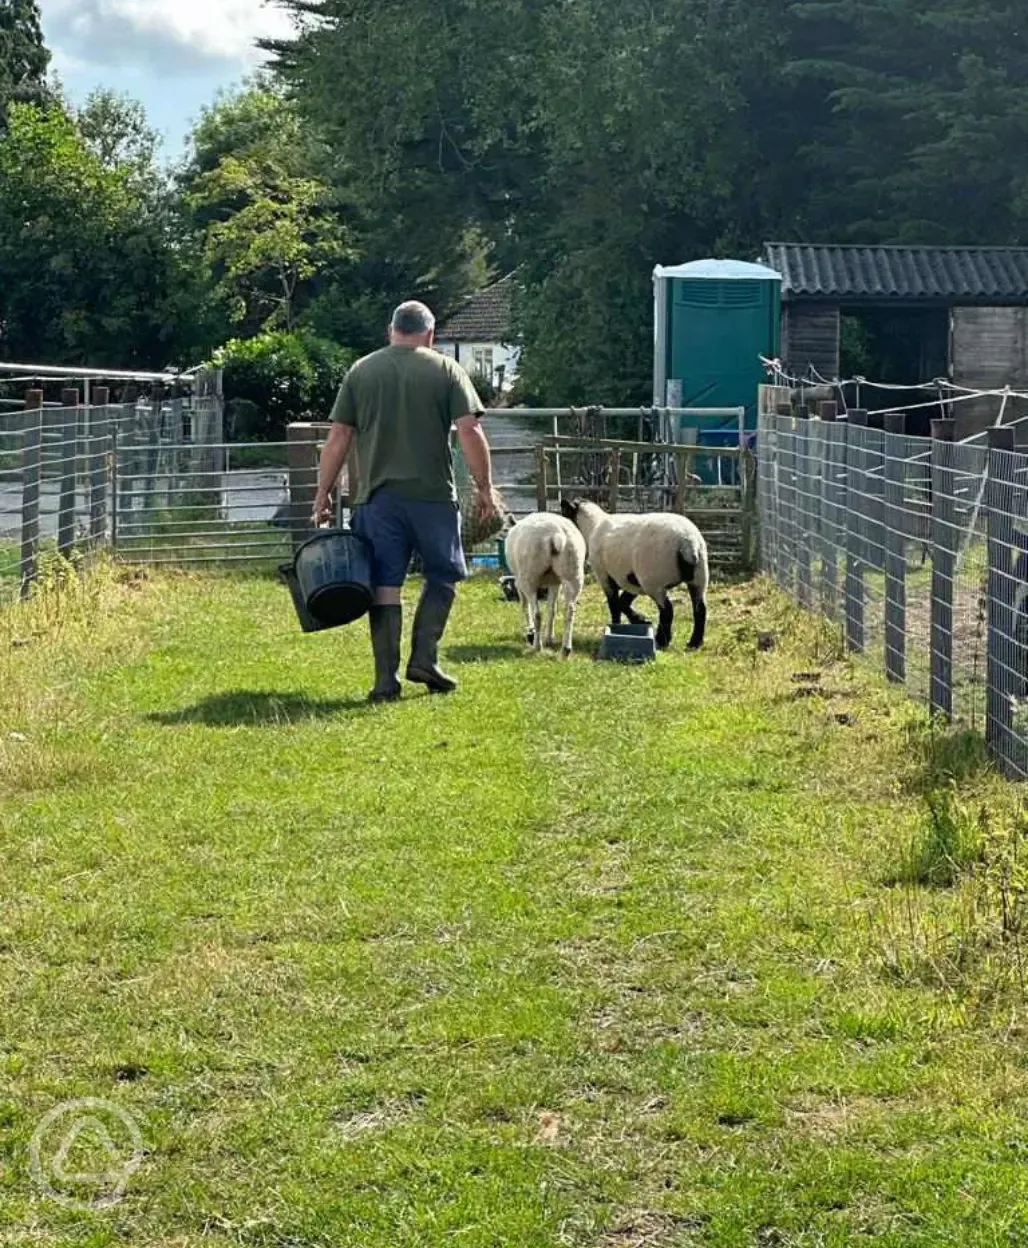 Site owner with sheep